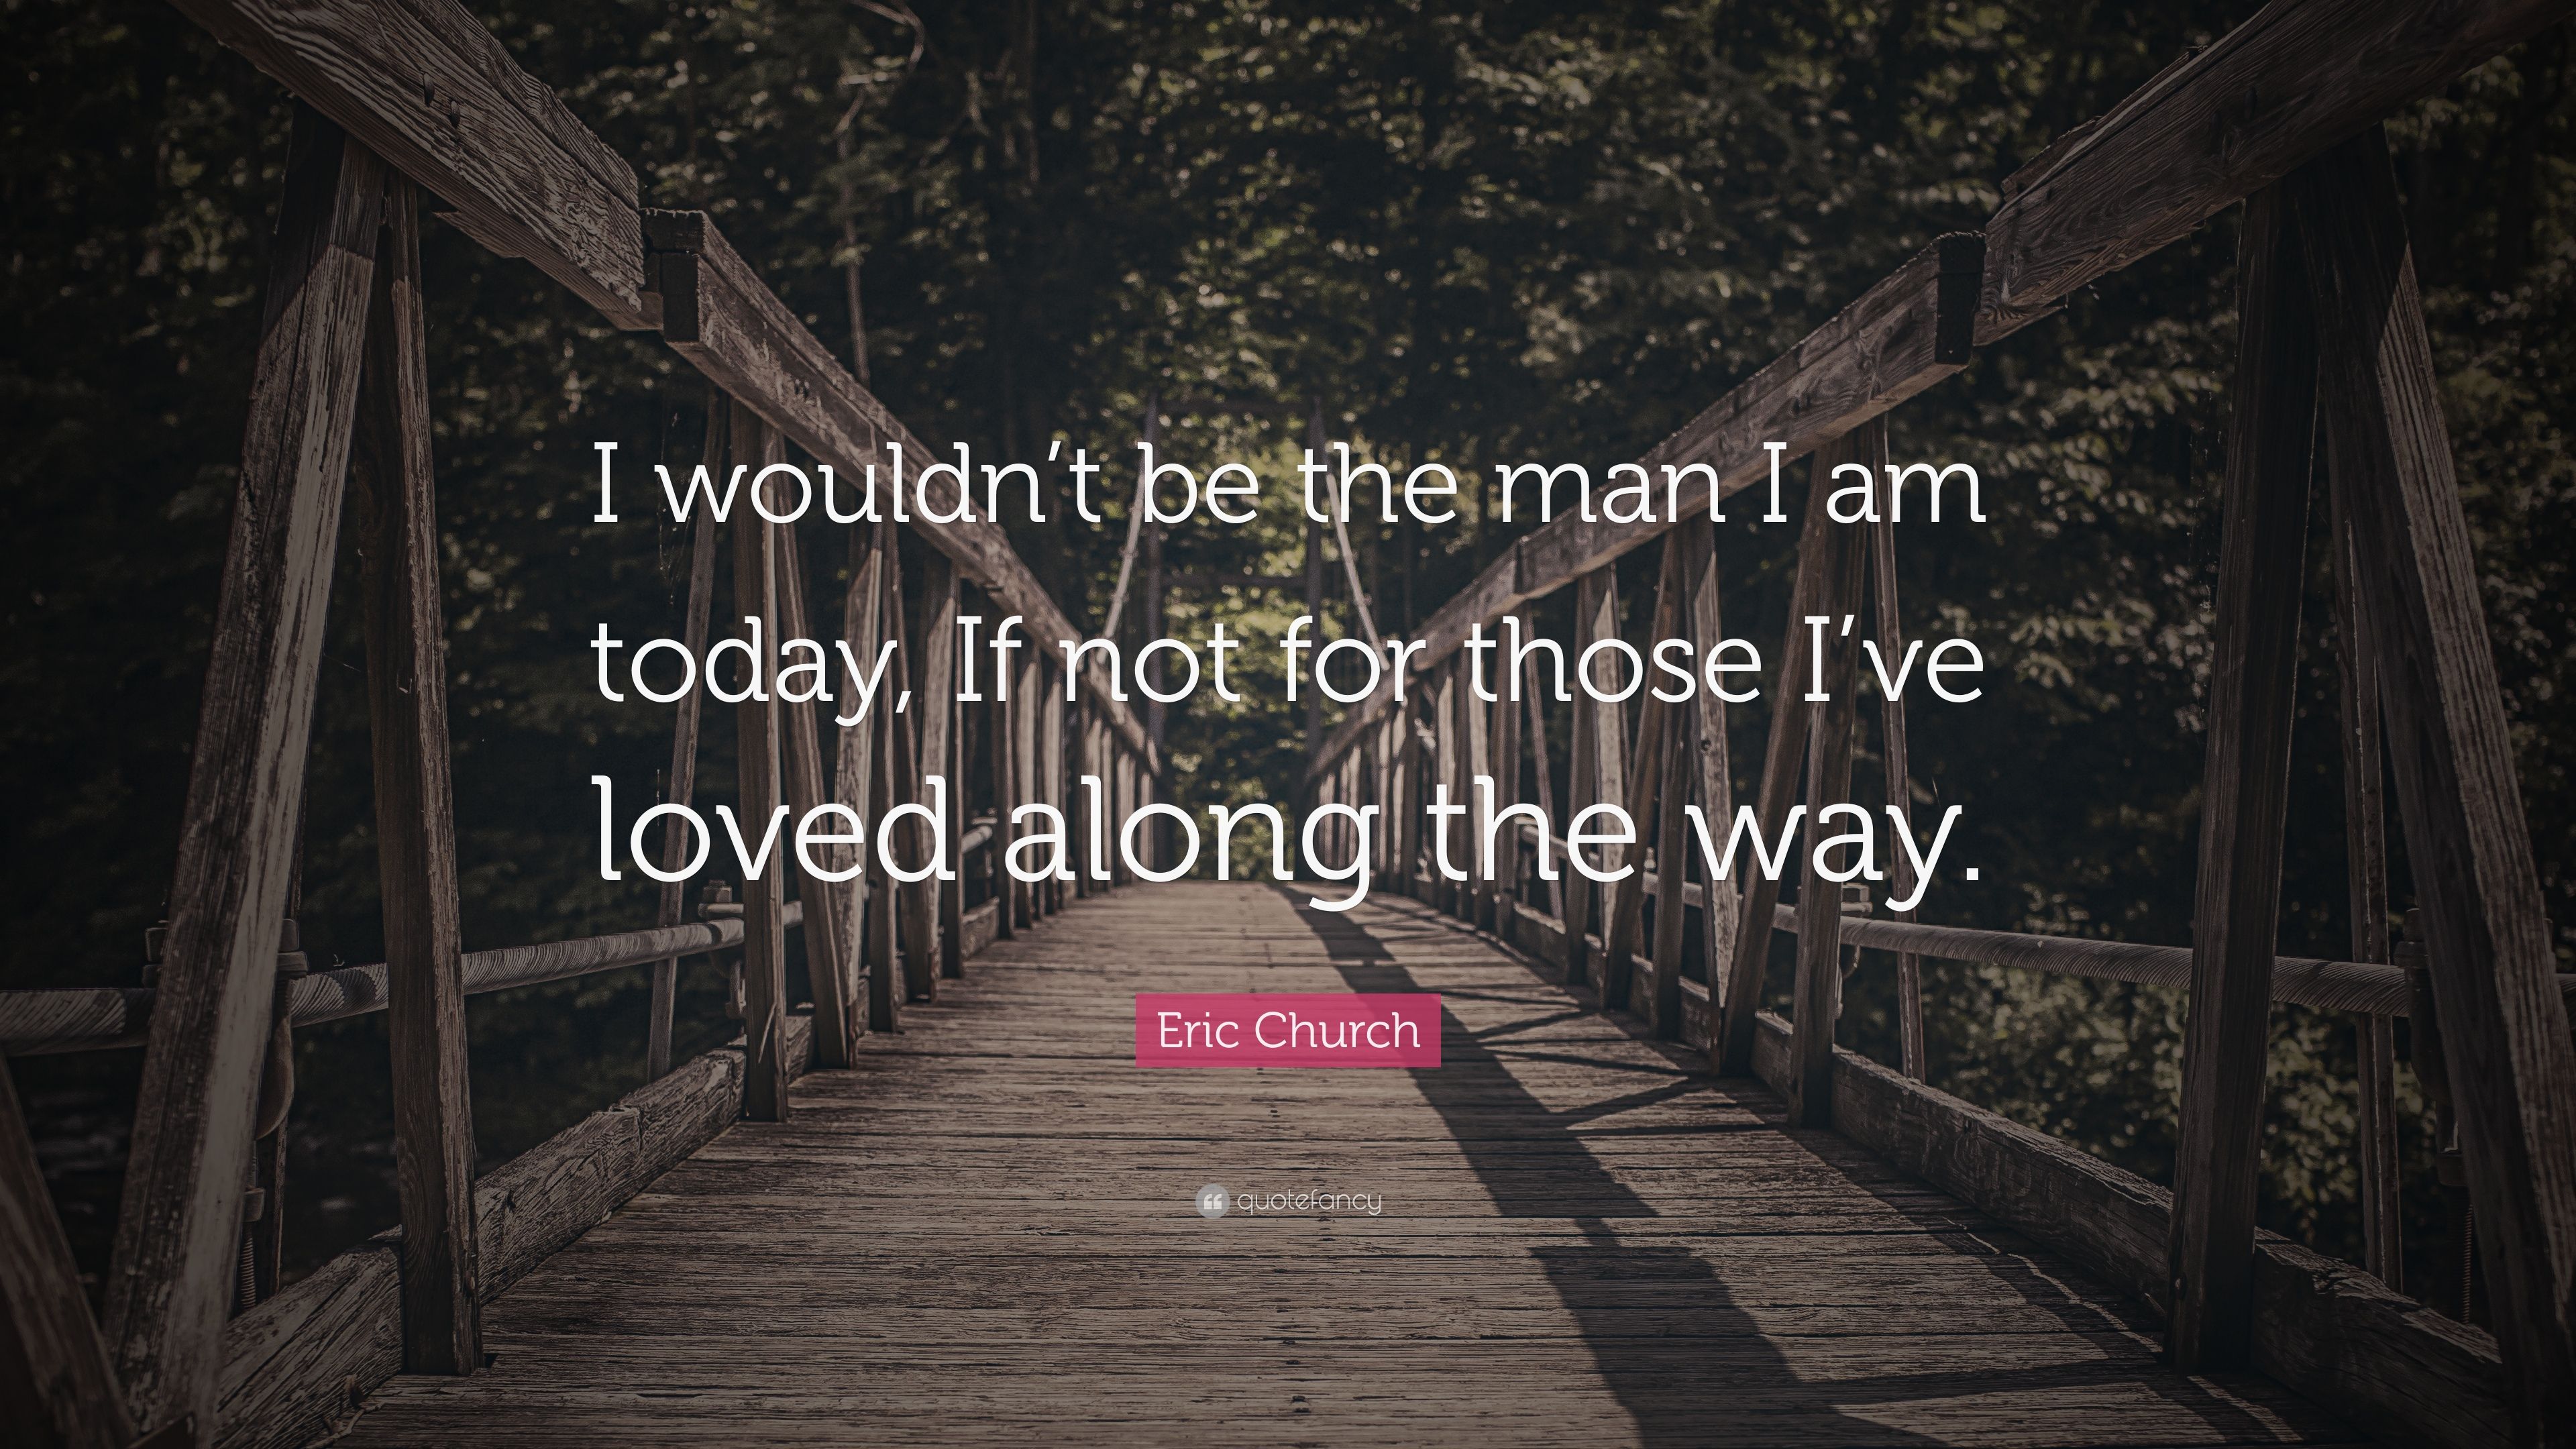 Eric Church Quote: “I wouldn't be the man I am today, If not